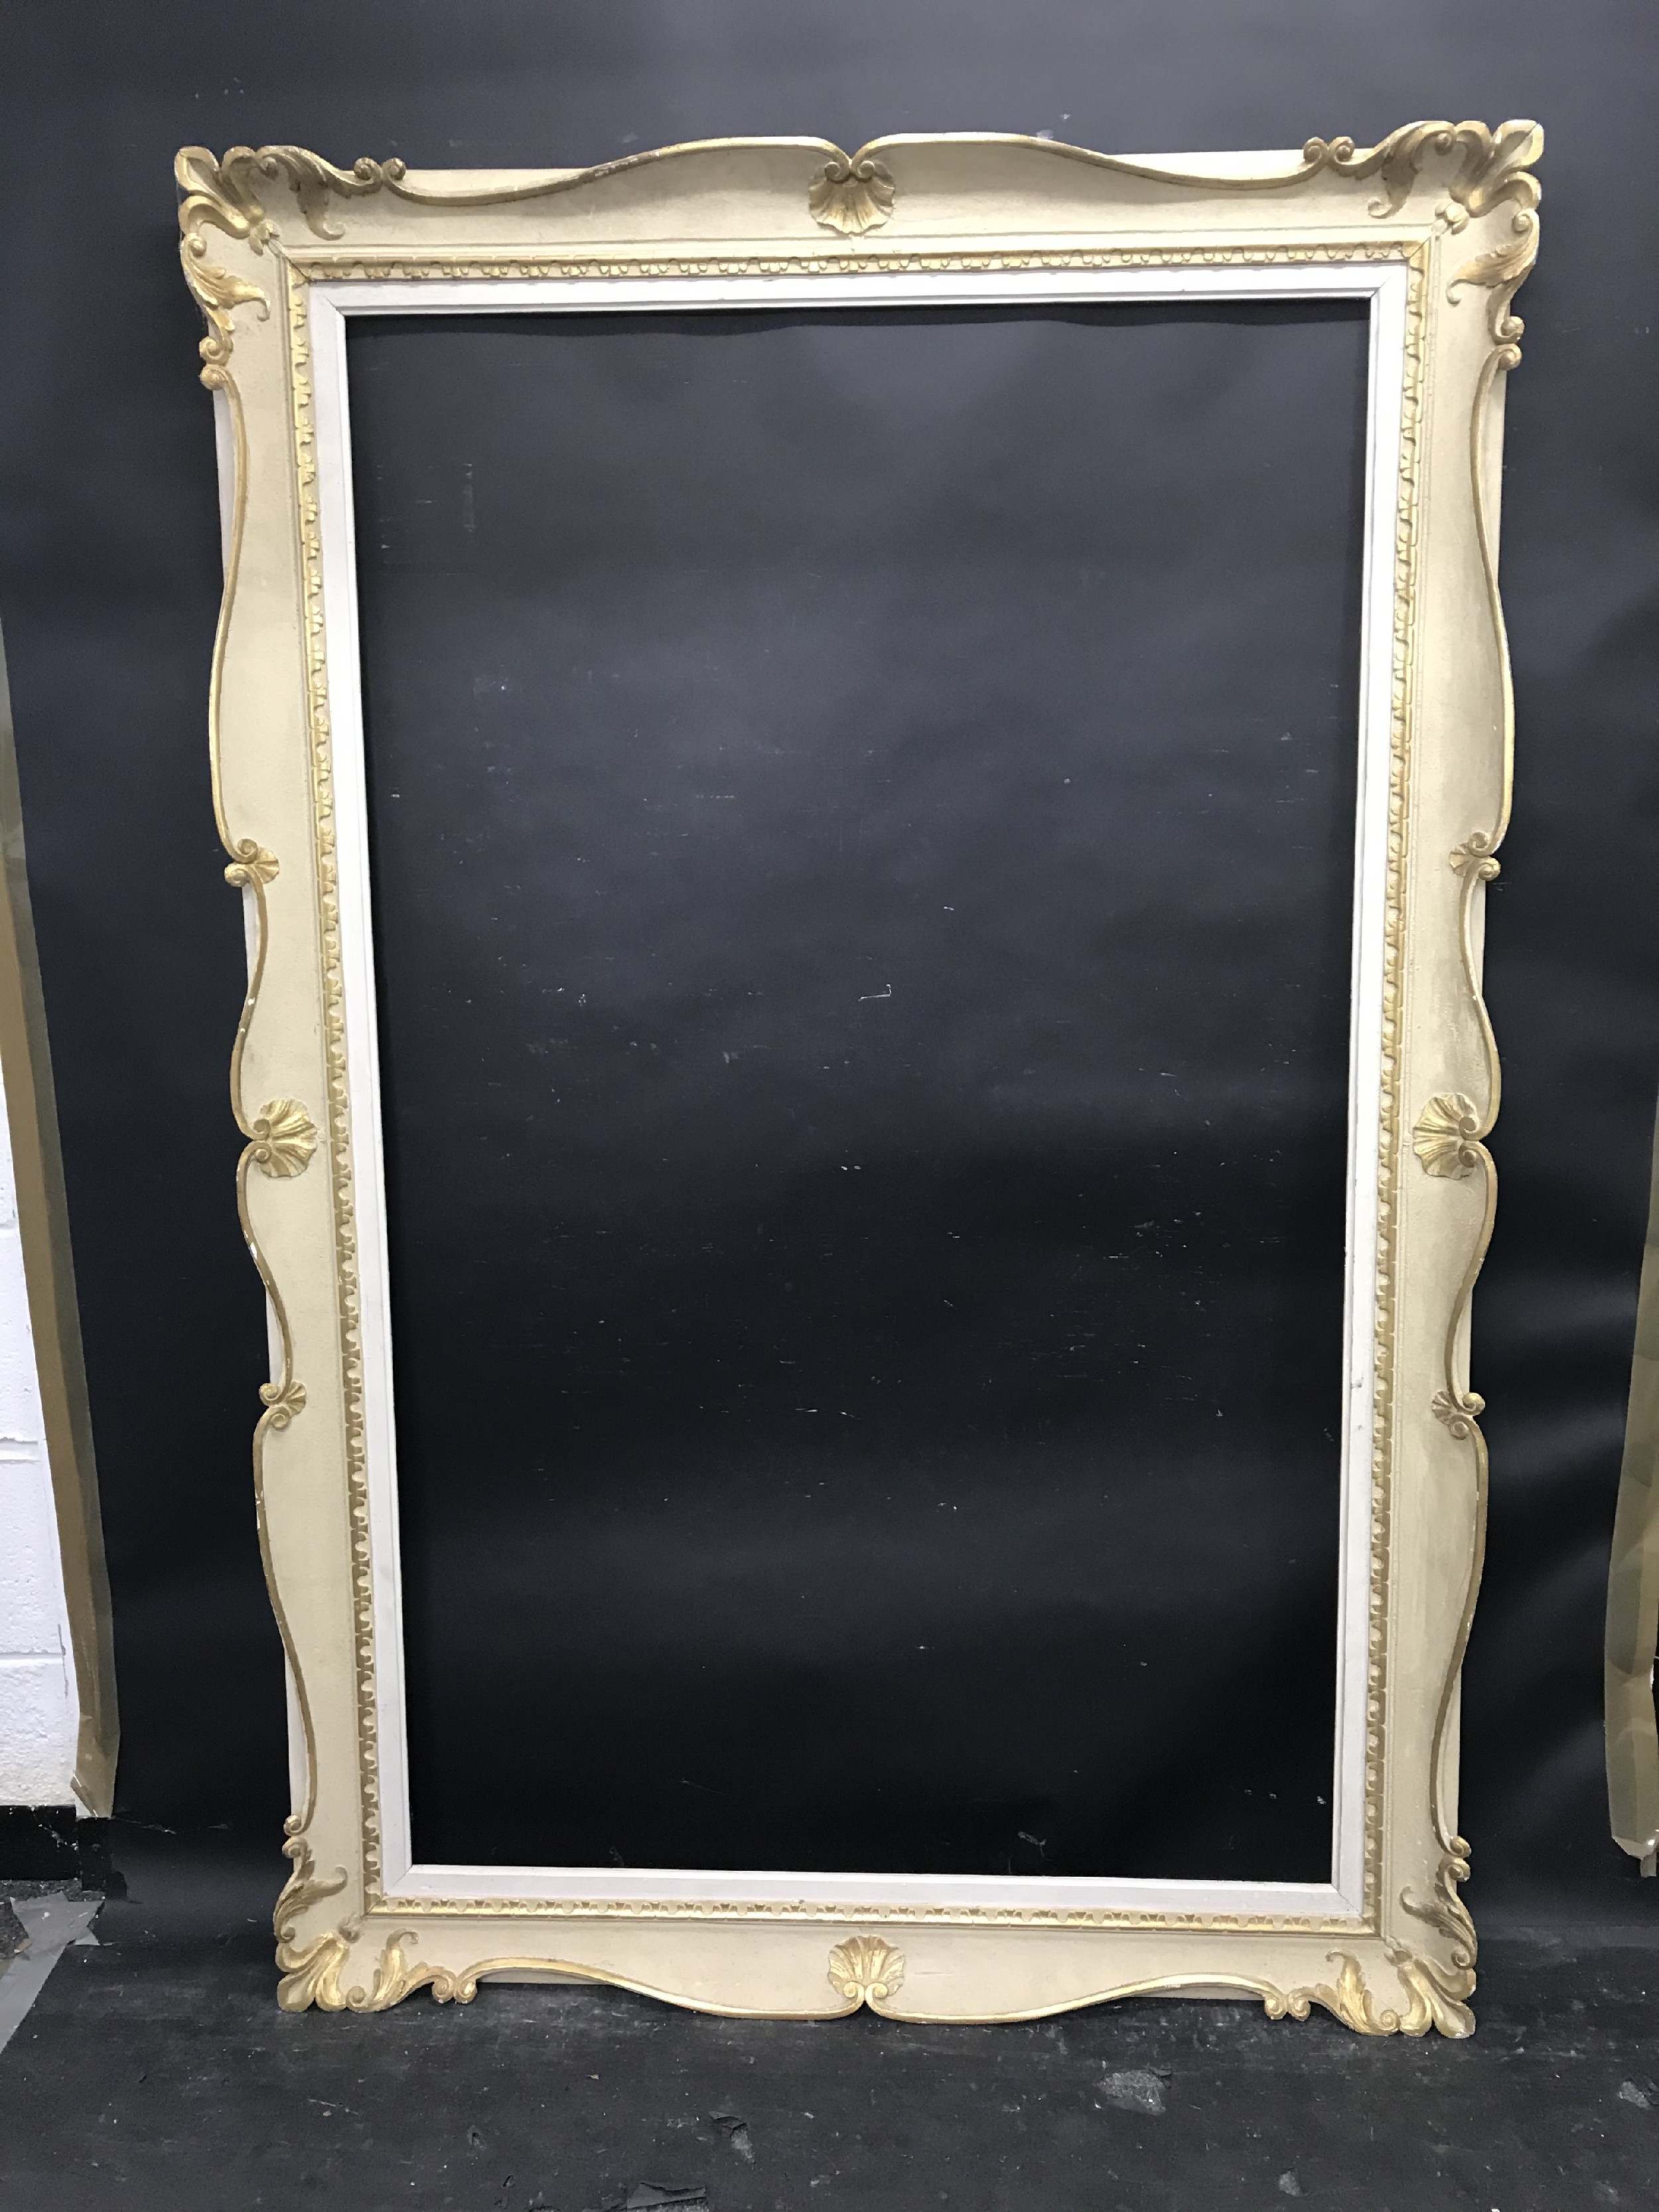 20th Century French School. A Gilt and Painted Frame, 57.25" x 35.25" (rebate). - Image 2 of 3